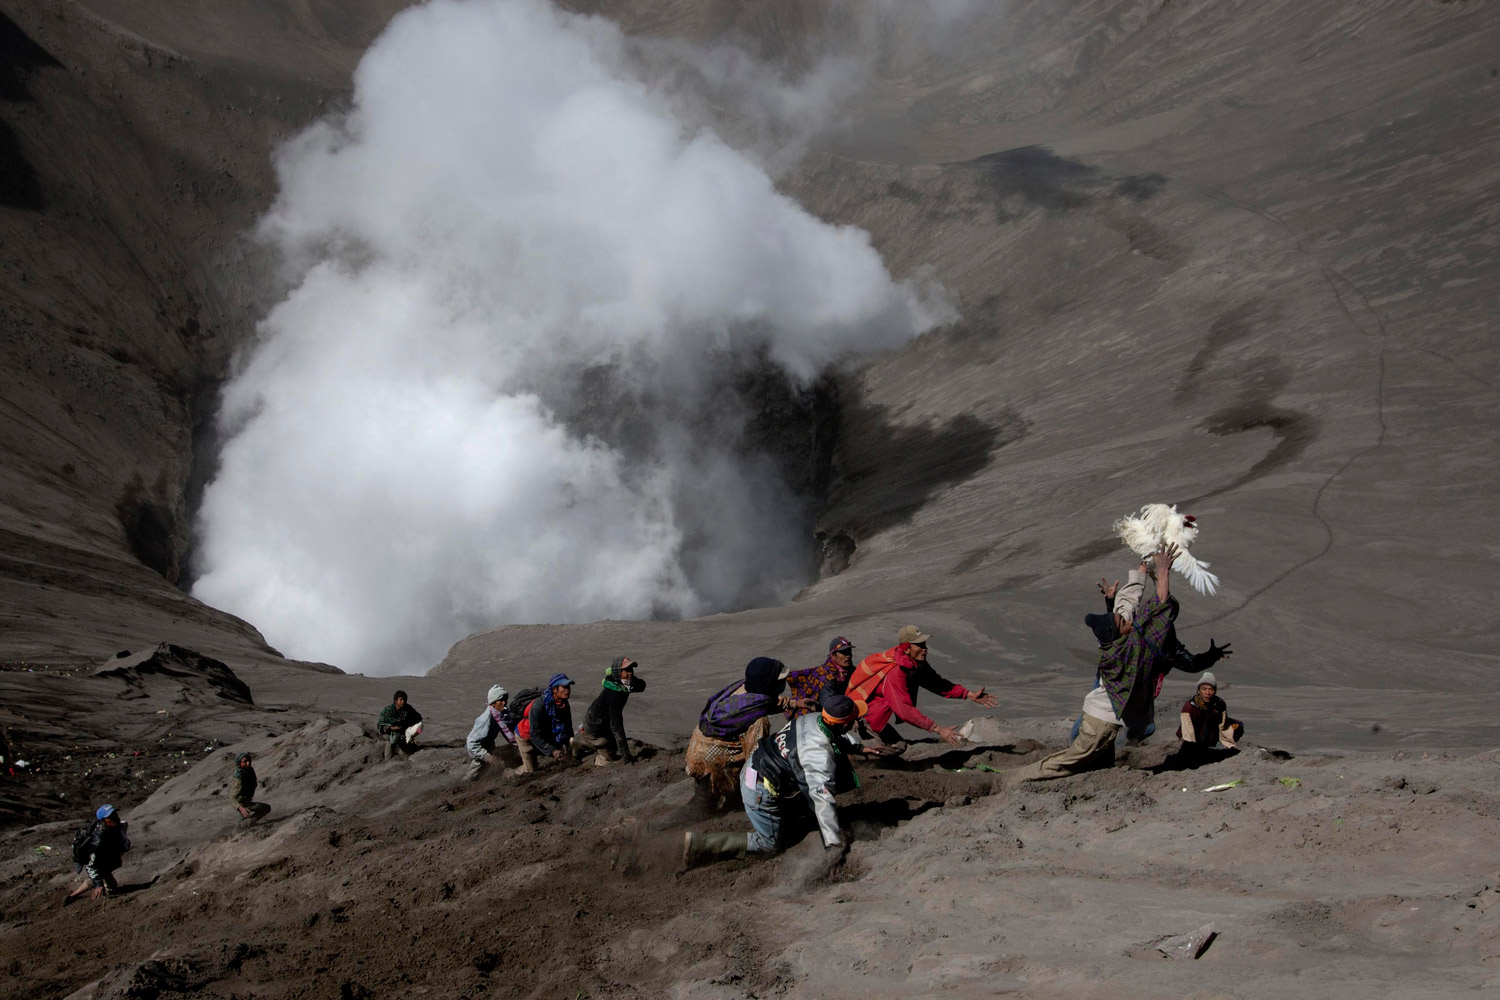 August 15, 2011. Villagers attempt to catch a chicken thrown by worshippers into a volcanic crater during the annual Kasada festival at Mount Bromo in Indonesia's East Java province. Villagers and worshippers throw offerings such as livestock and other crops into the volcanic crater to give thanks to the Hindu gods for ensuring their safety and prosperity.